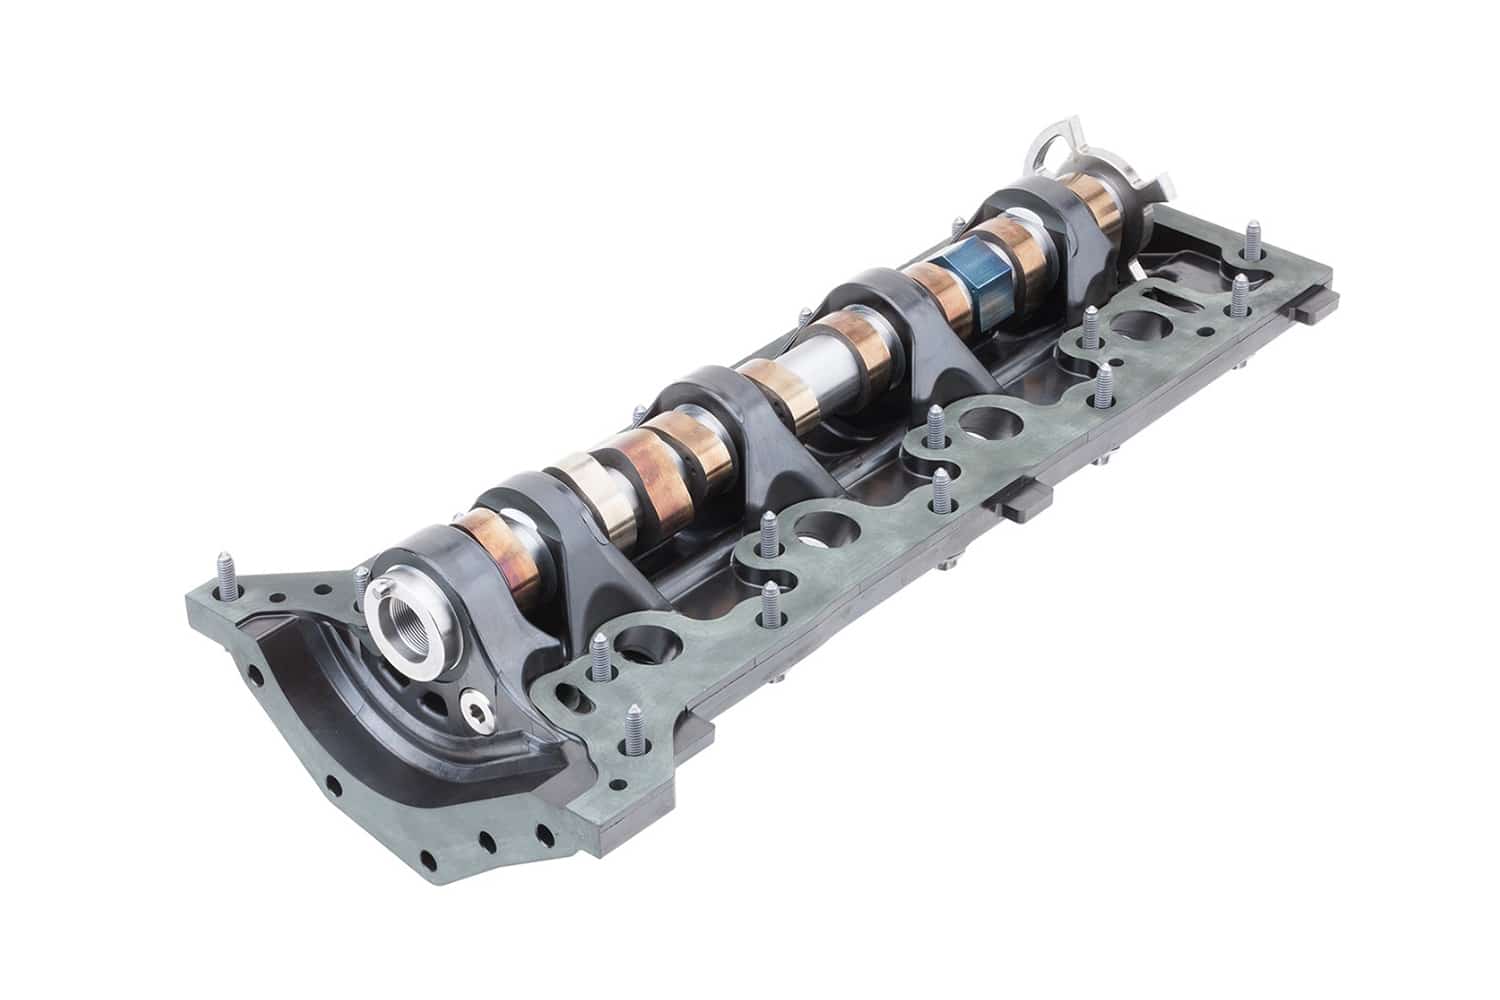 The camshaft module features a monolithic design with integrated bearings.